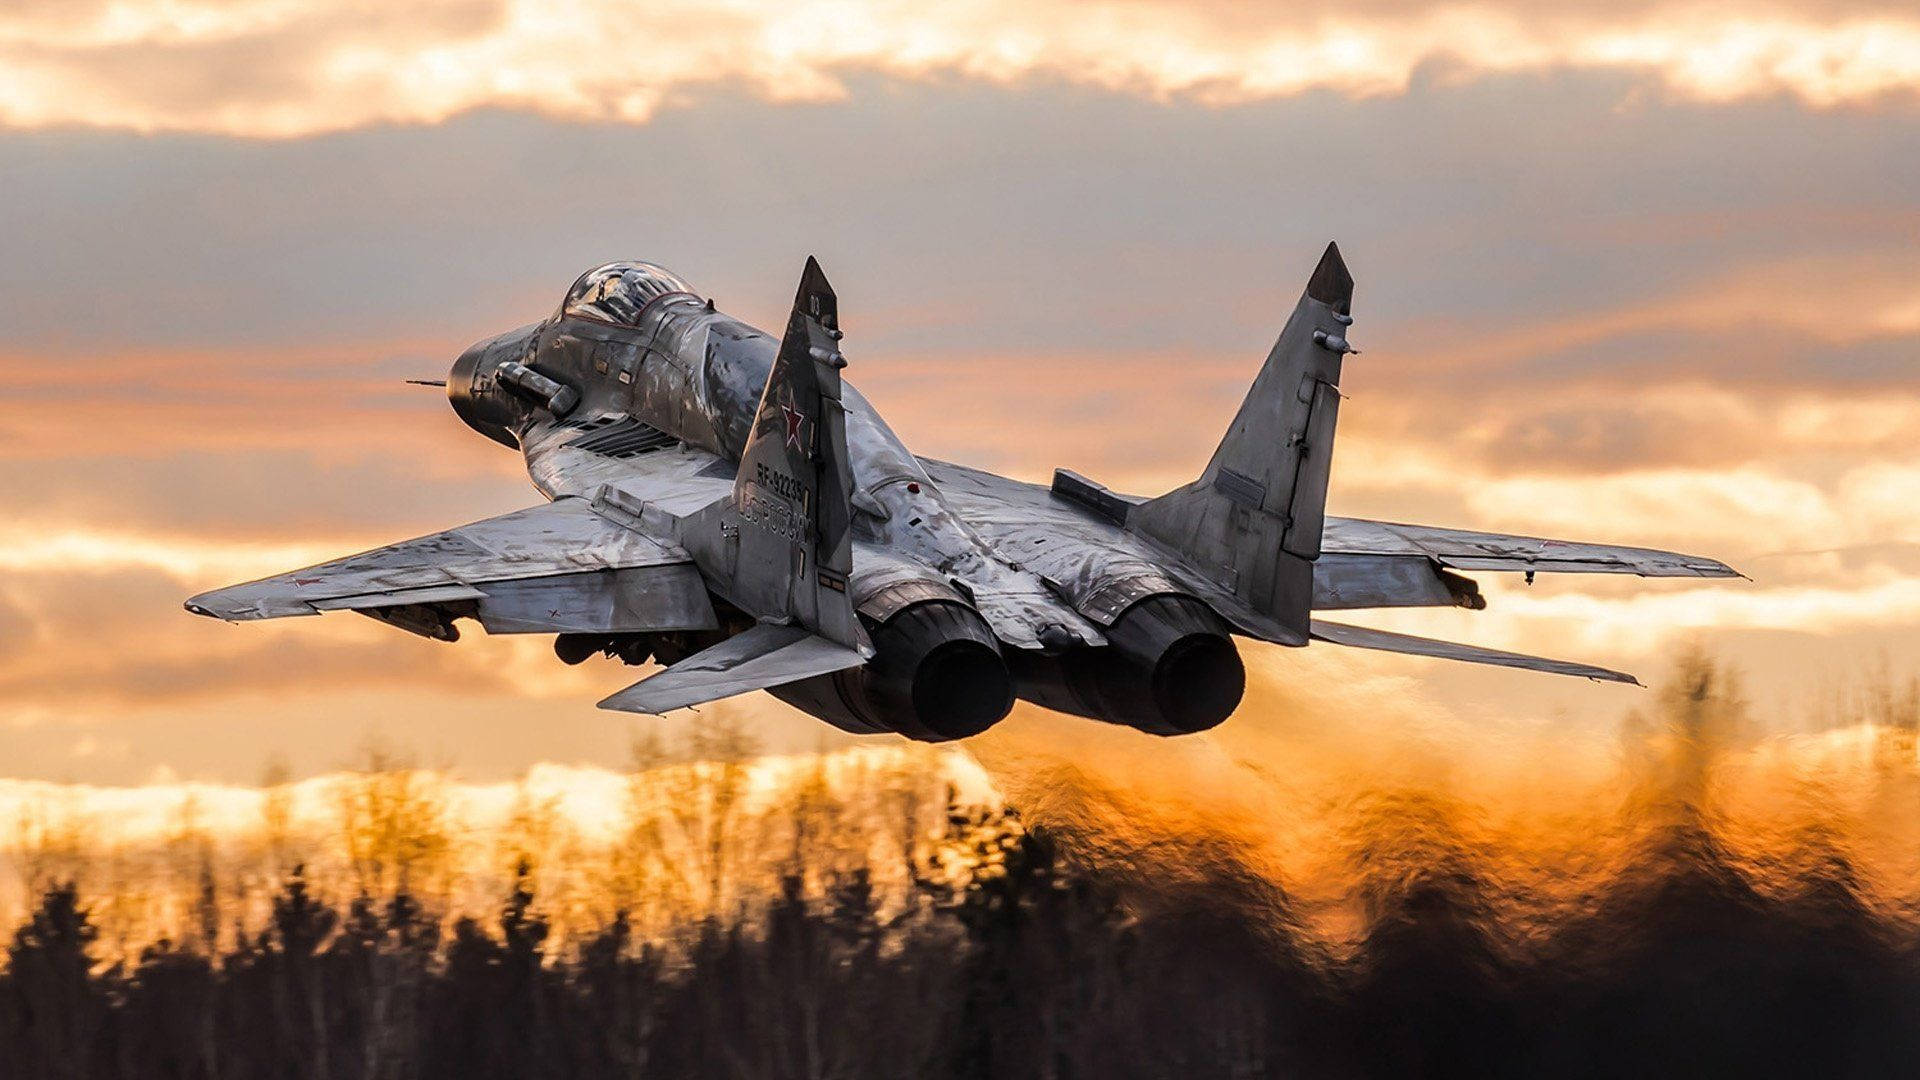 Caption: Majestic Mikoyan MiG-35 Fighter Jets Soaring Over a Forest Wallpaper